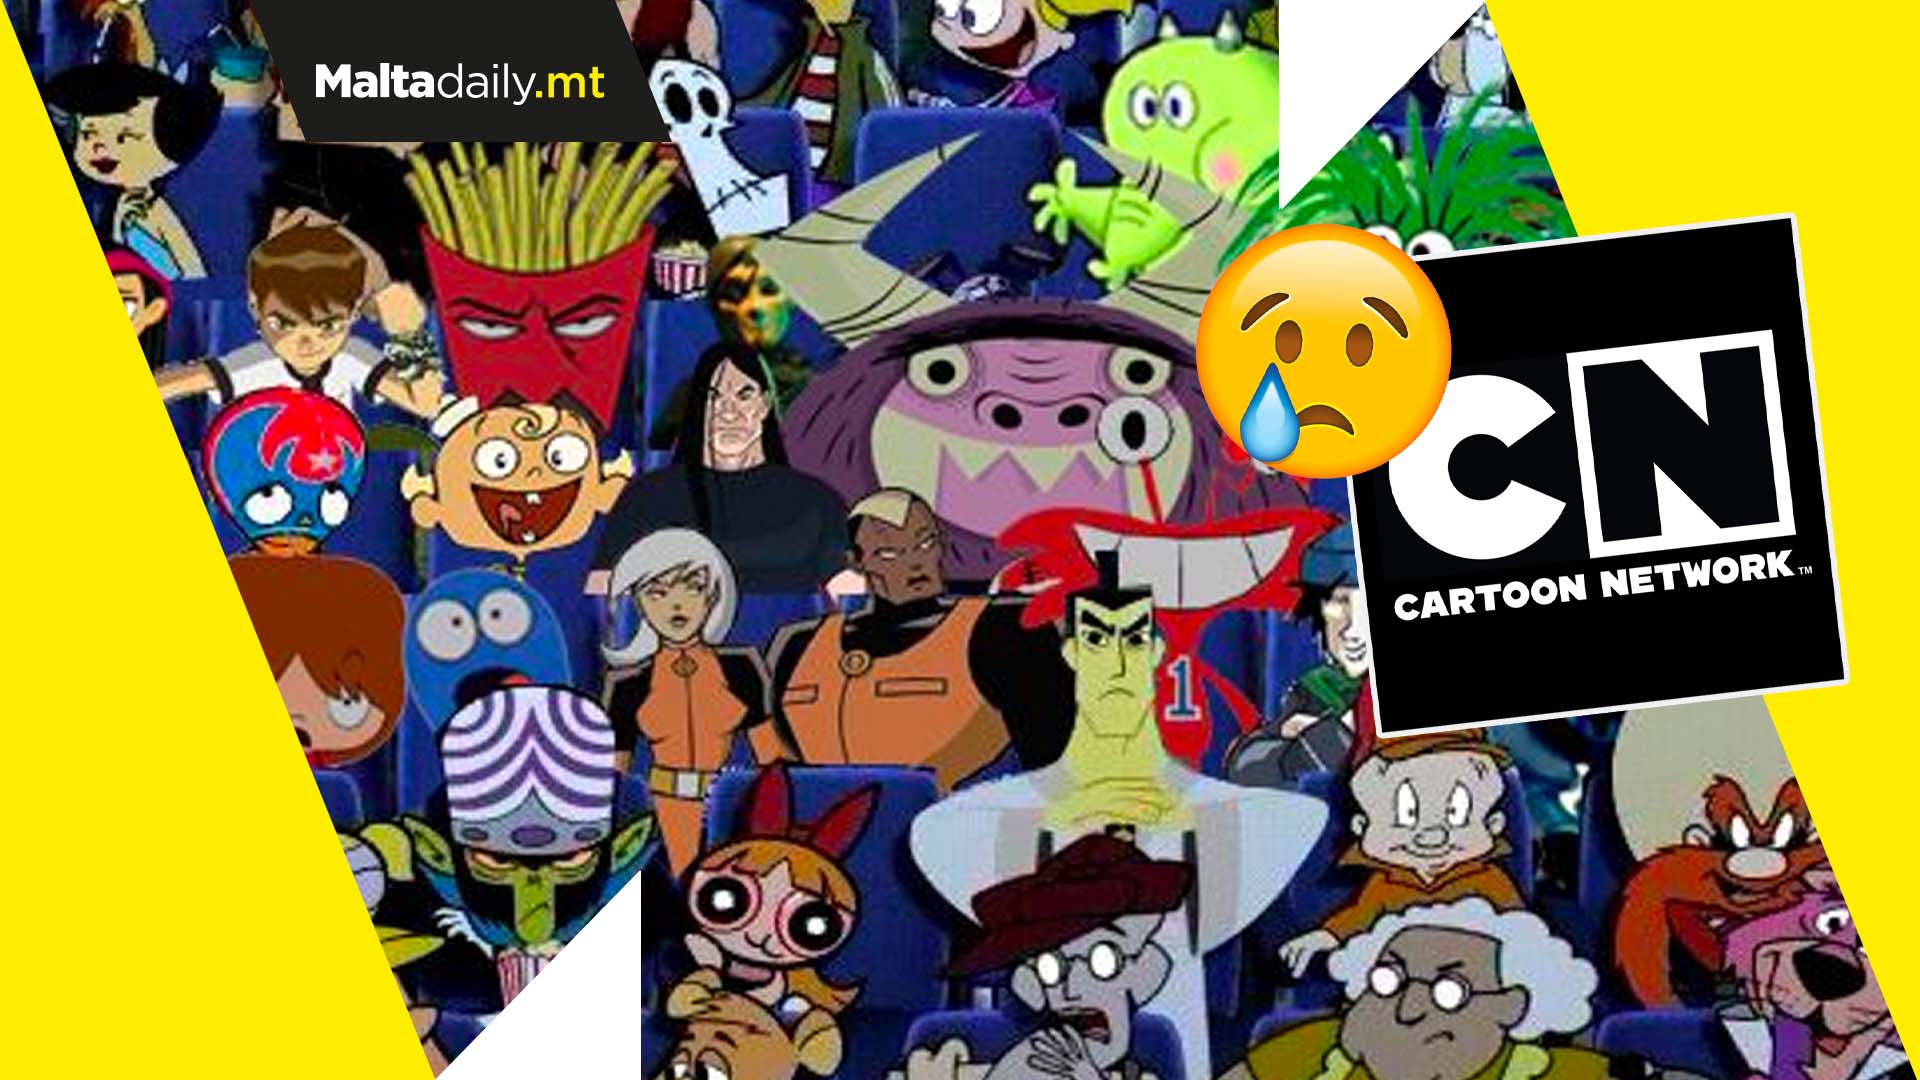 Is Cartoon Network coming to an end as rumours suggest?